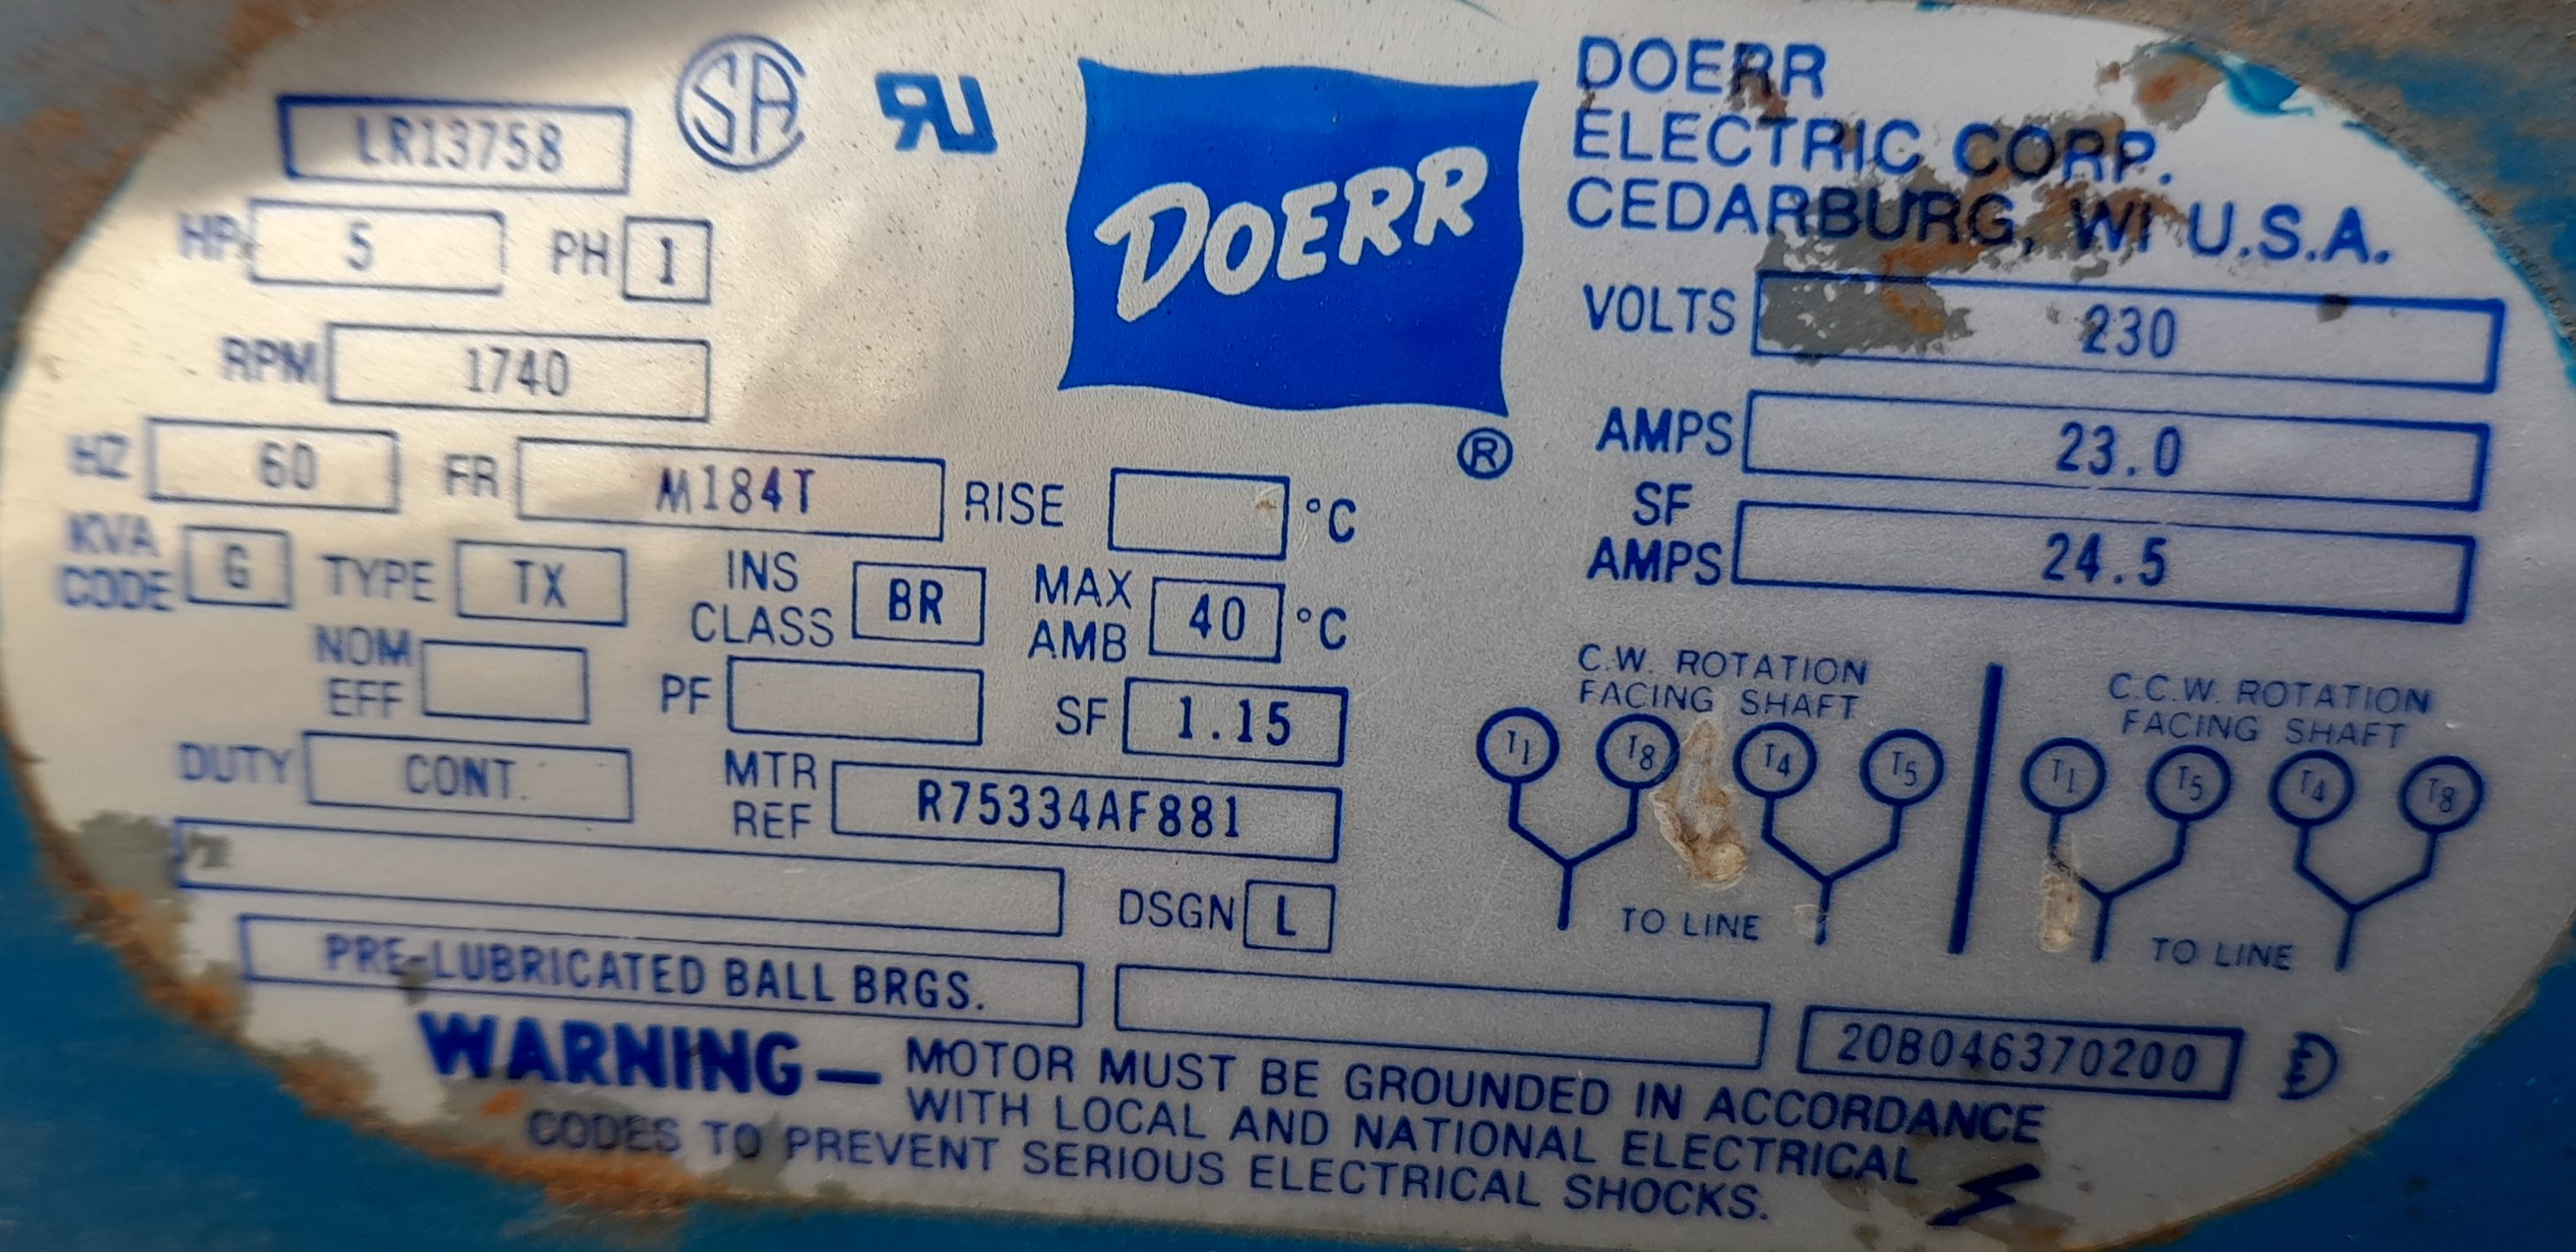 Image for run capacitor sizing ? cannot determine original size and no manufacturer info is available